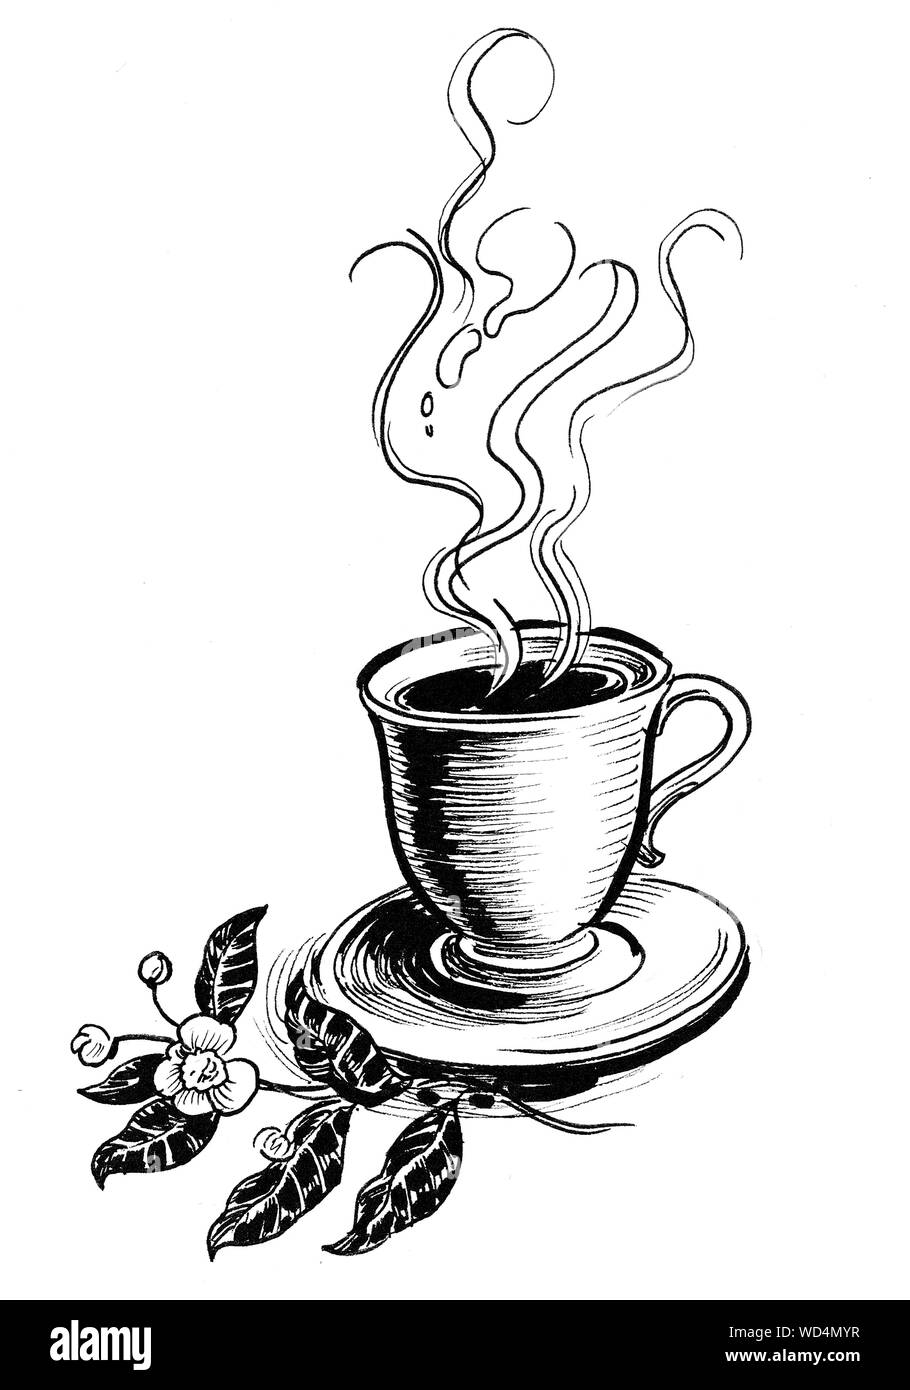 Cup Of Tea And Tea Plant Ink Black And White Drawing Stock Photo Alamy